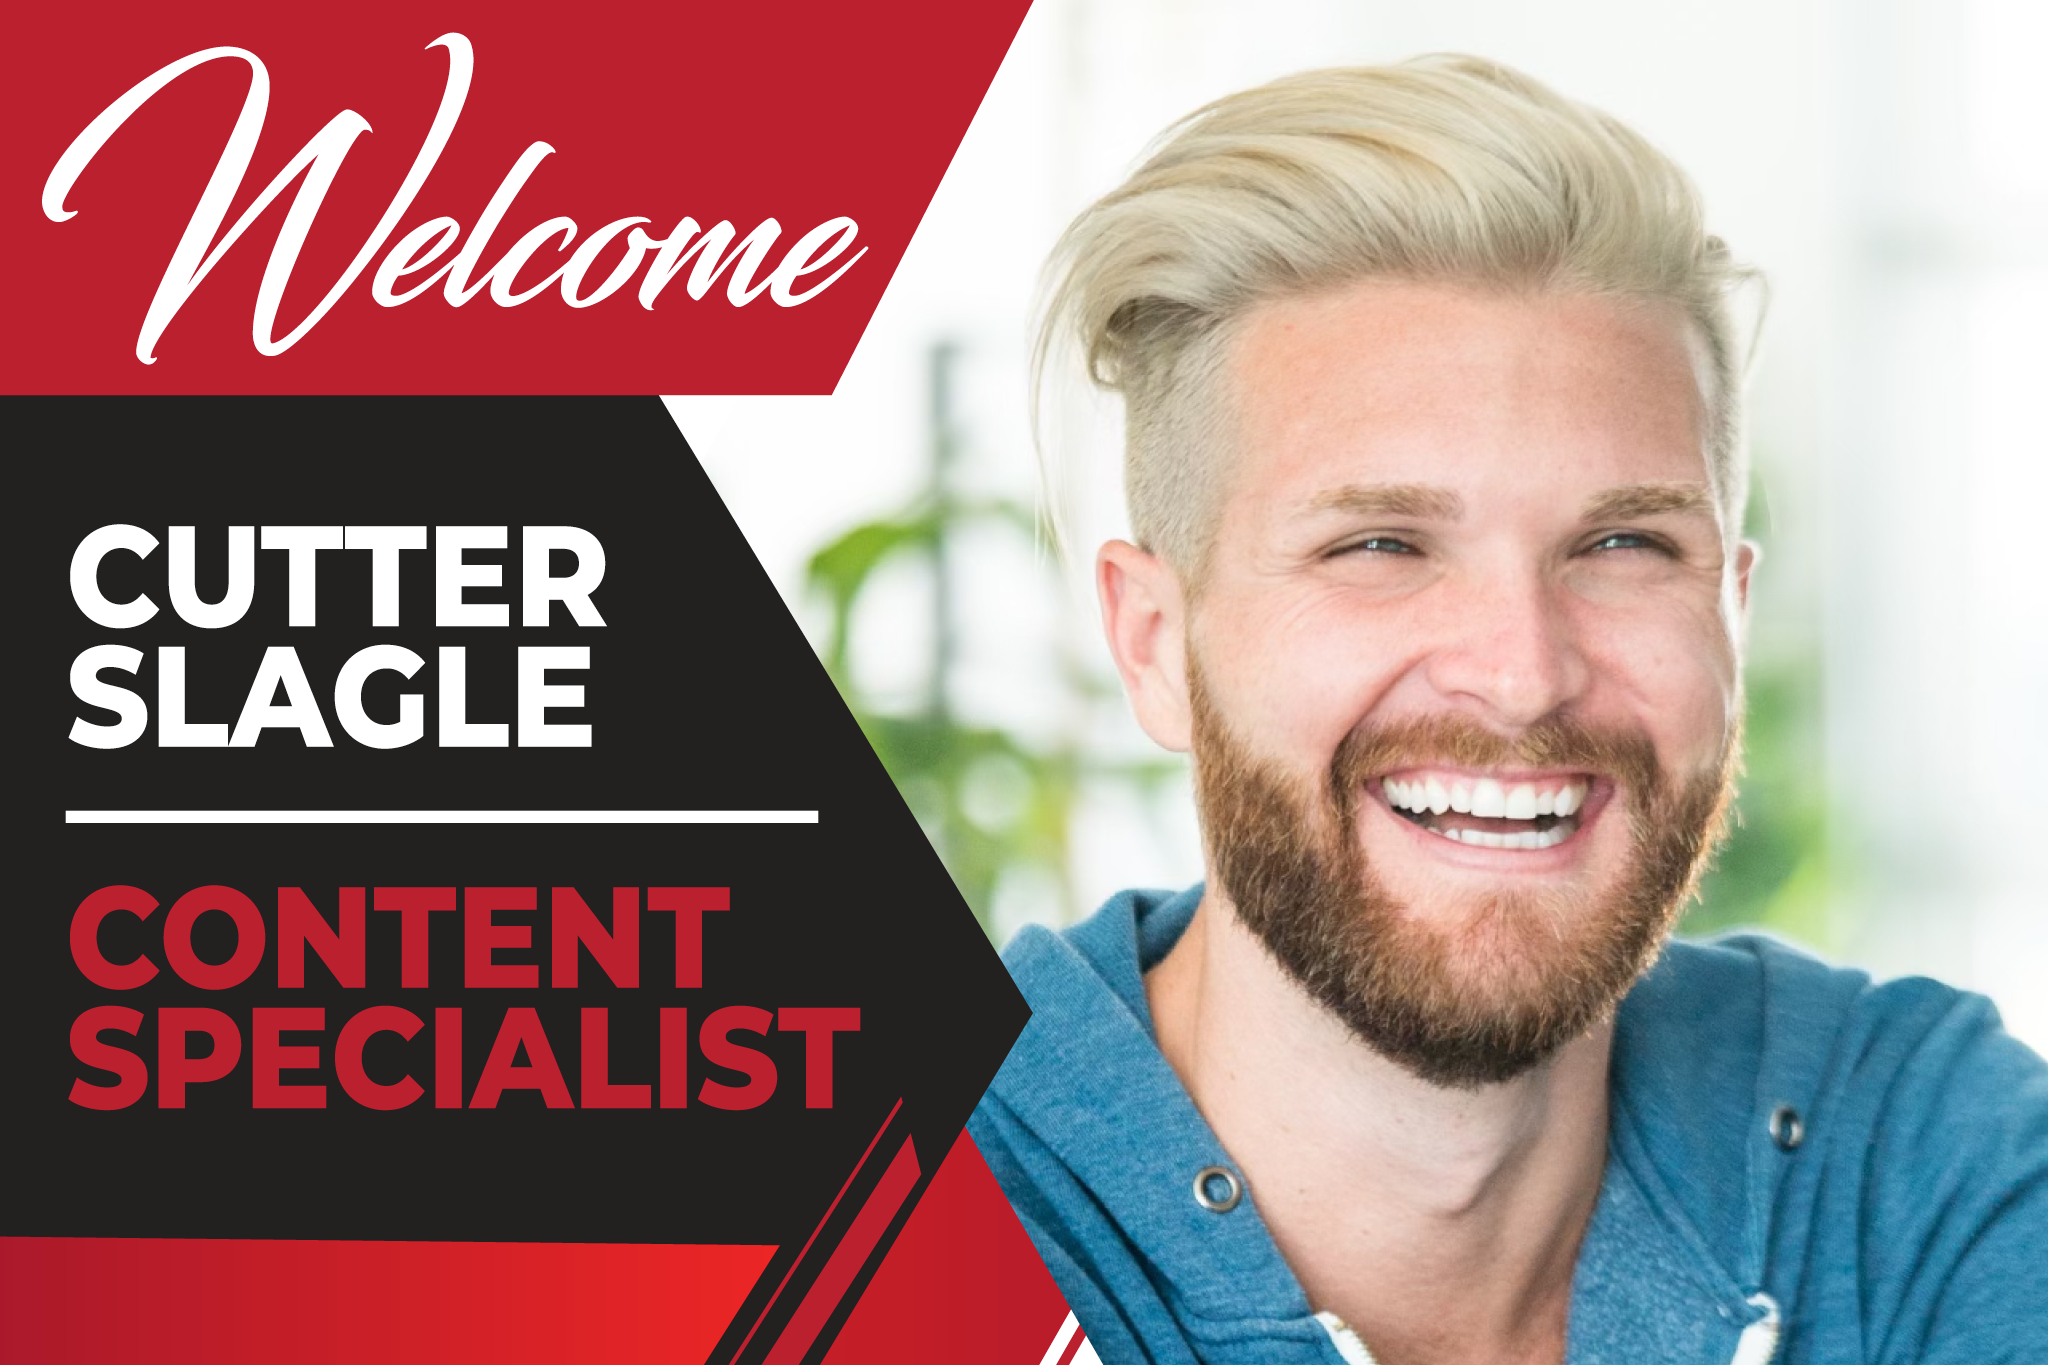 Welcome to the team, Cutter Slagle!